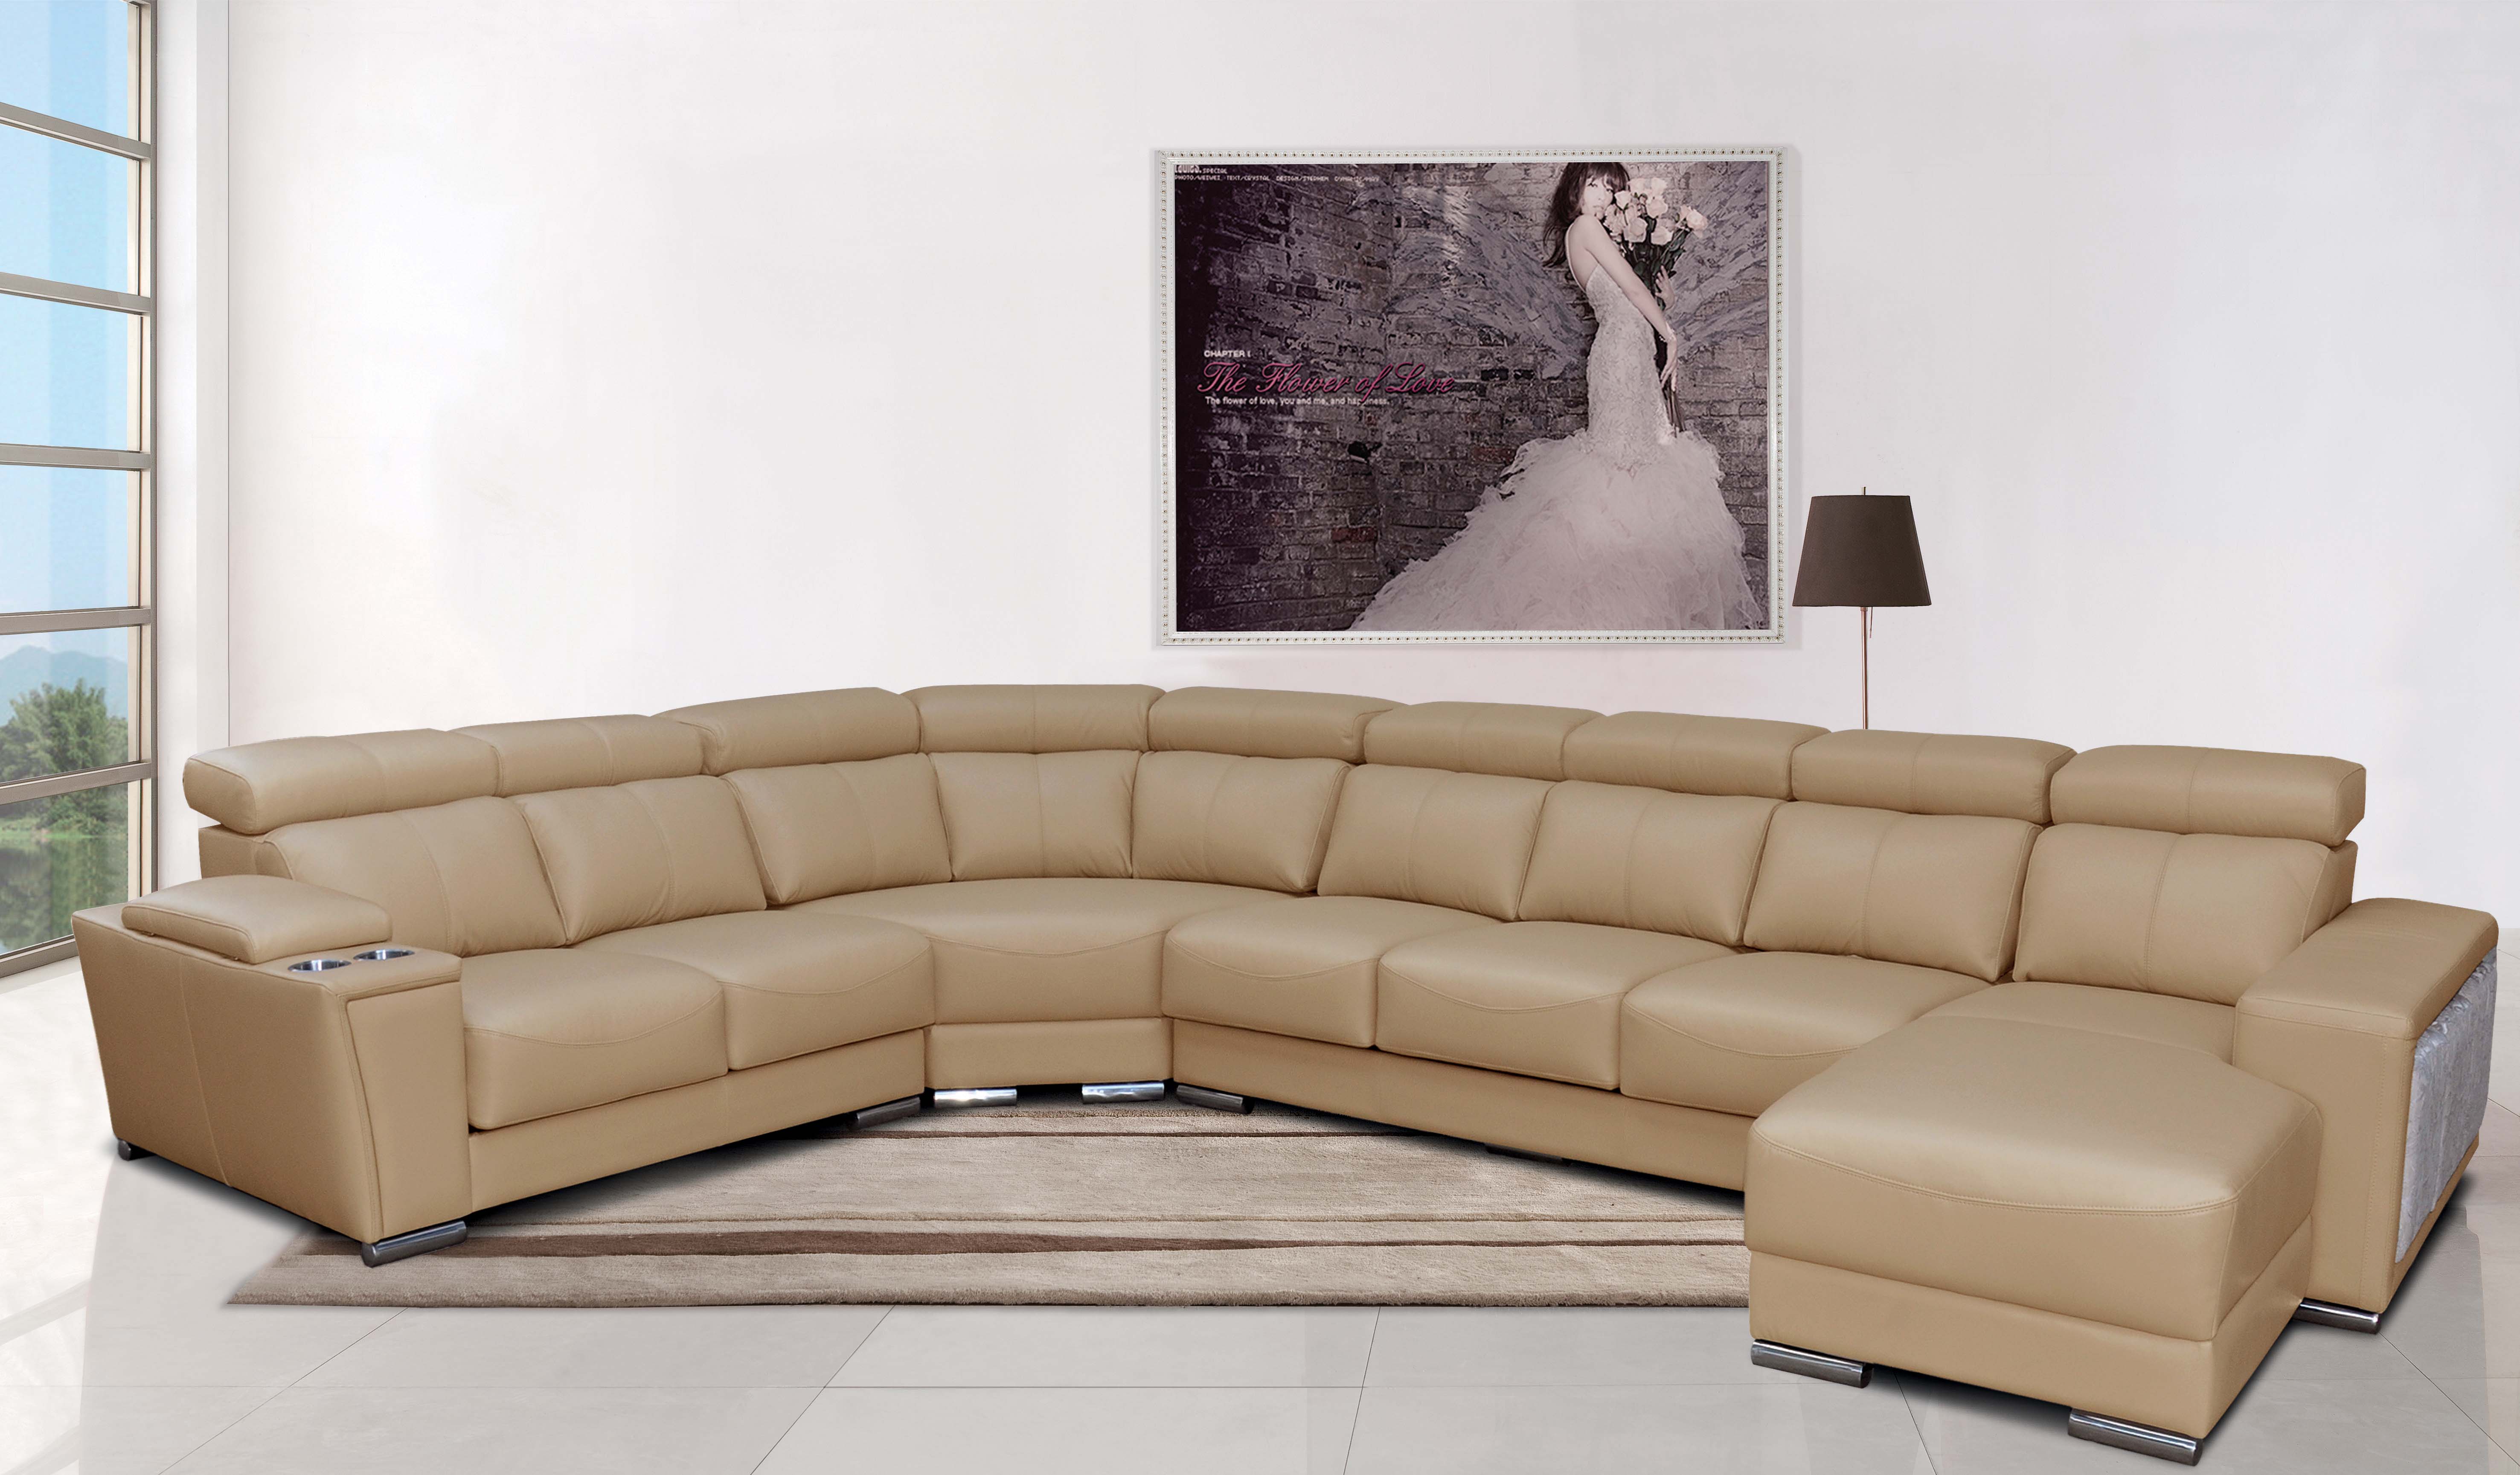 Living Room Furniture Sleepers Sofas Loveseats and Chairs 8312 Sectional with Sliding Seats